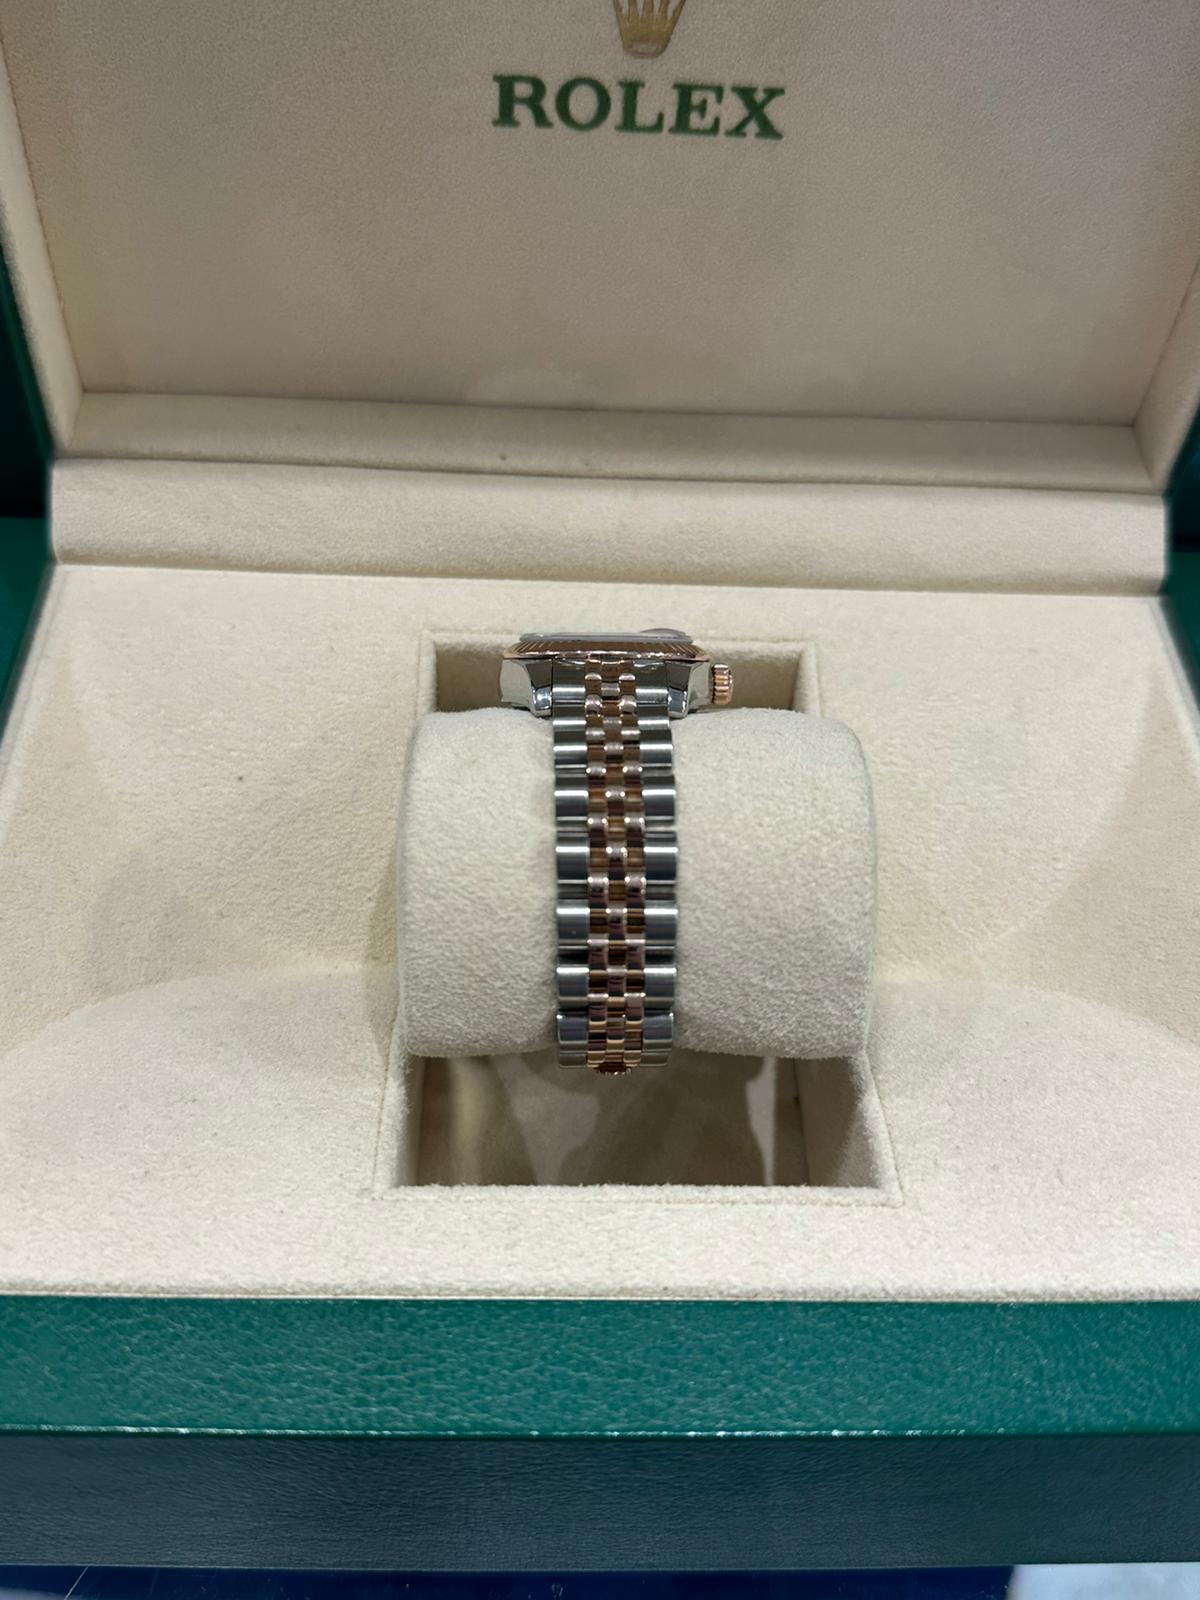 Rolex Datejust 26mm steel and rose gold - 179171 2 - Image 7 of 10